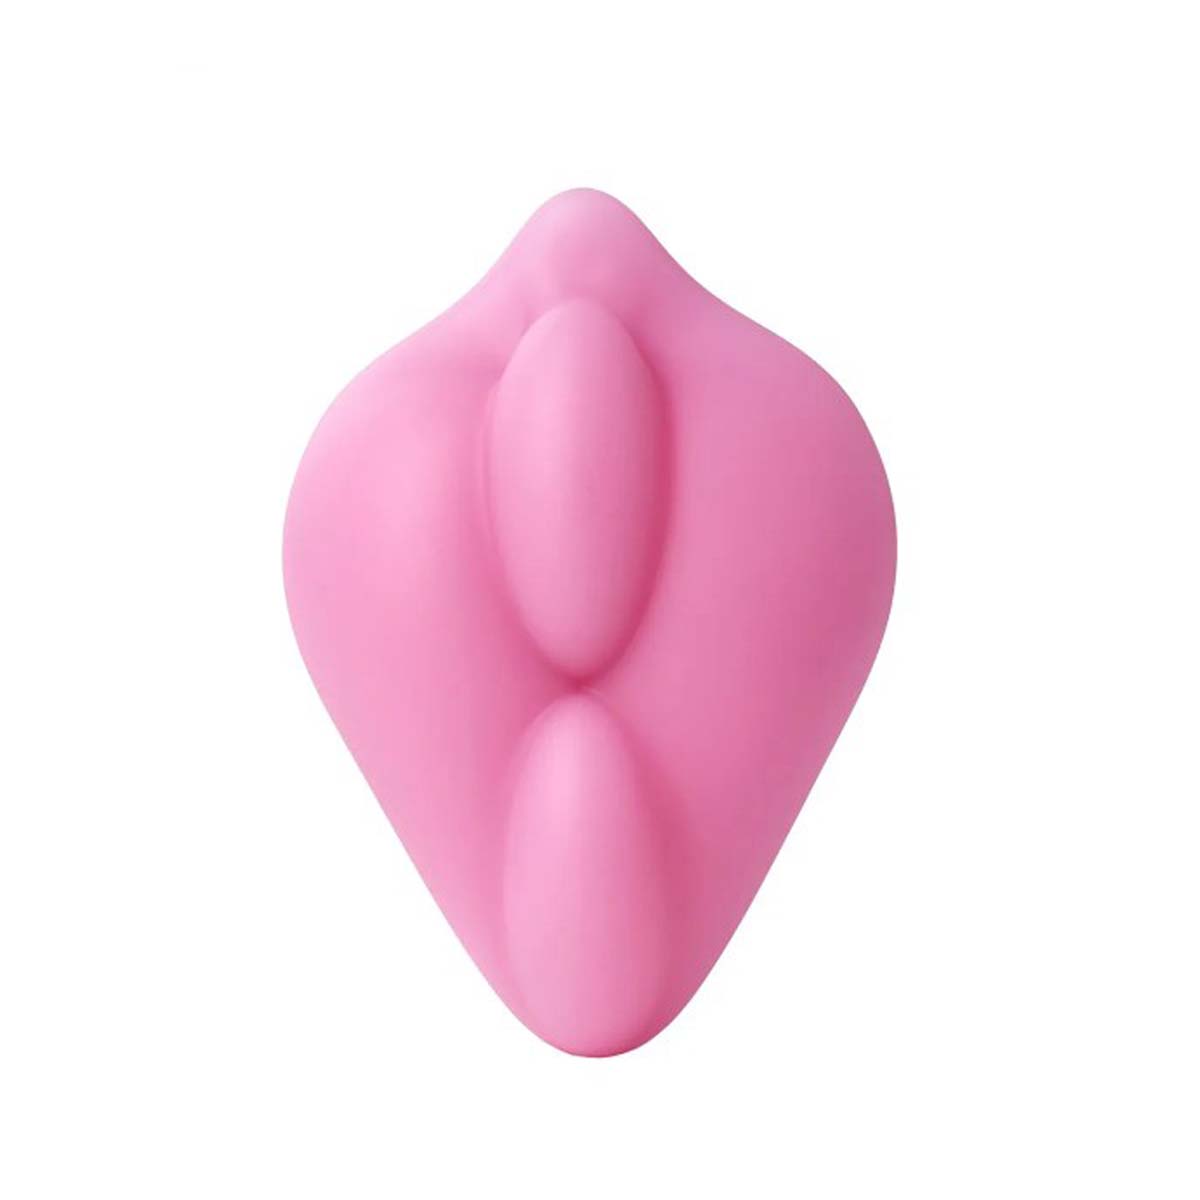 Pink silicone stimulation cushion for dildo Nudie Co